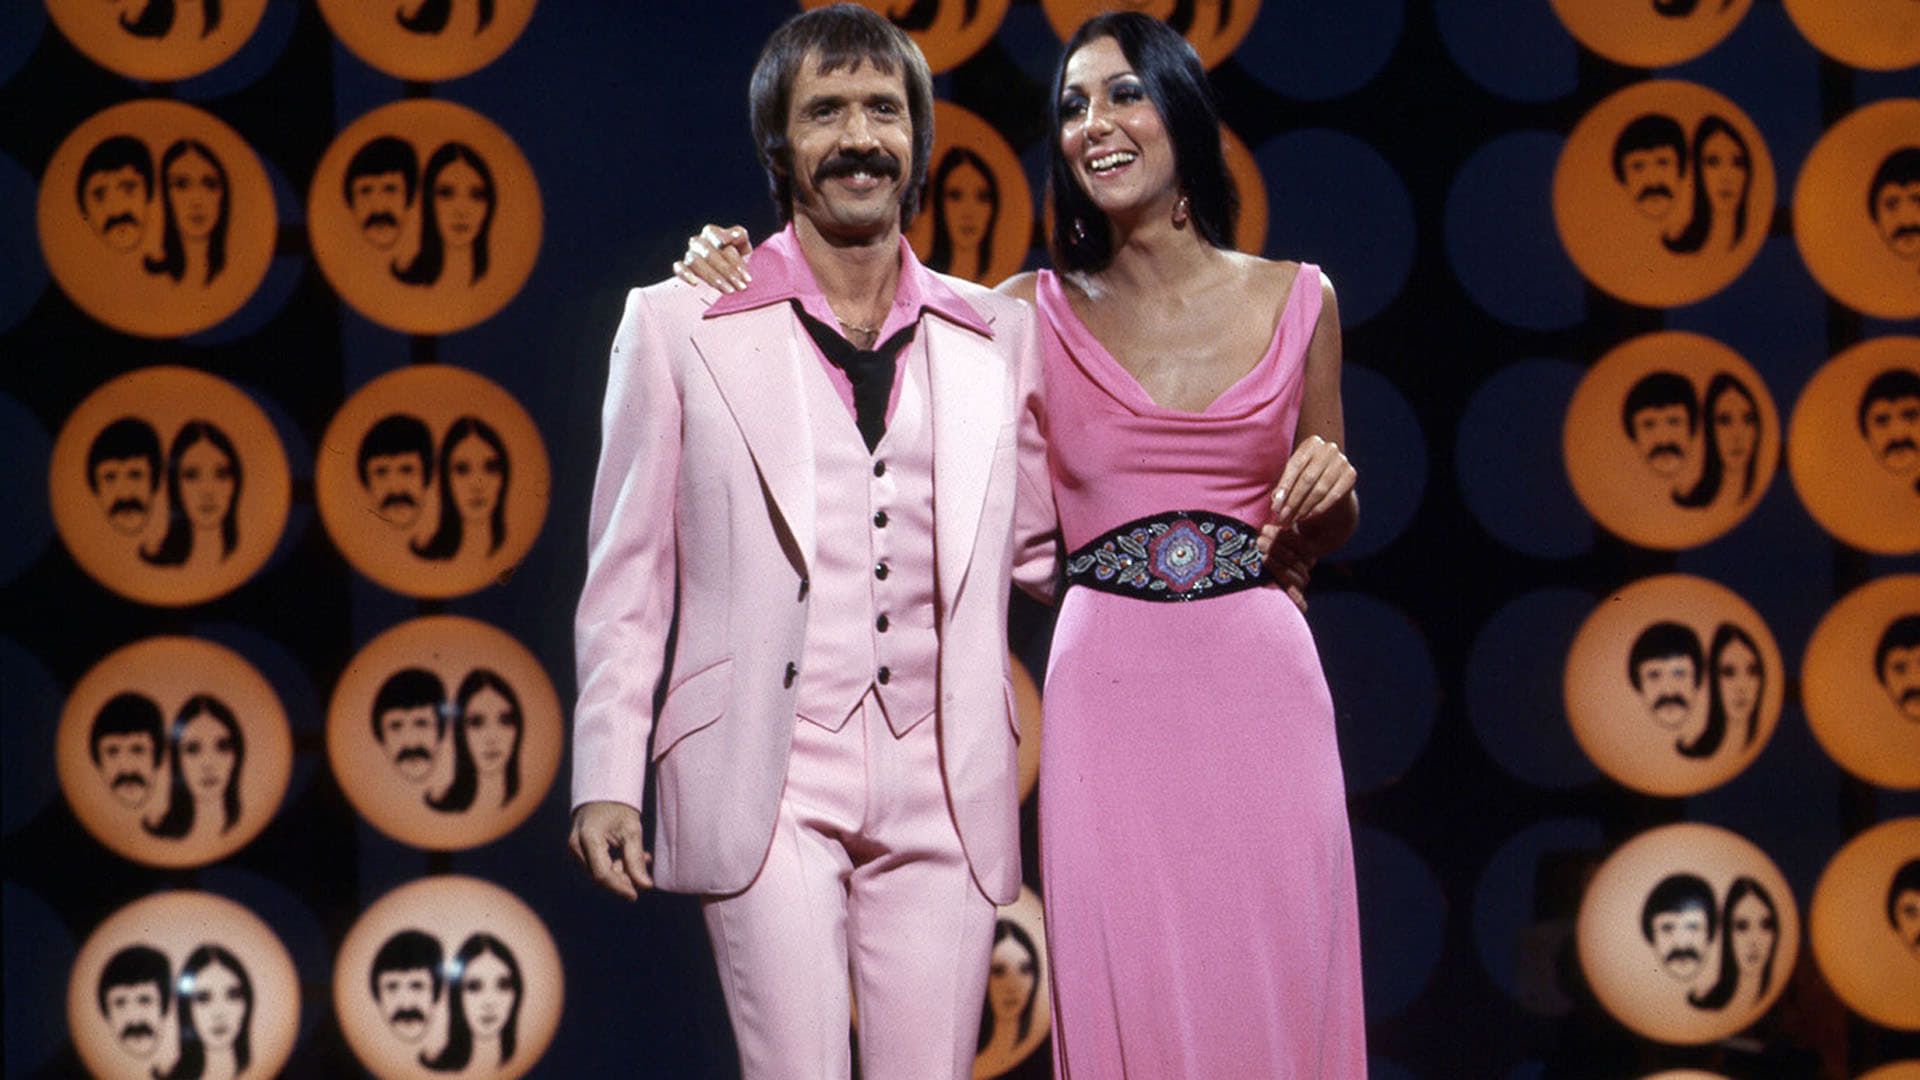 The Sonny and Cher Show background